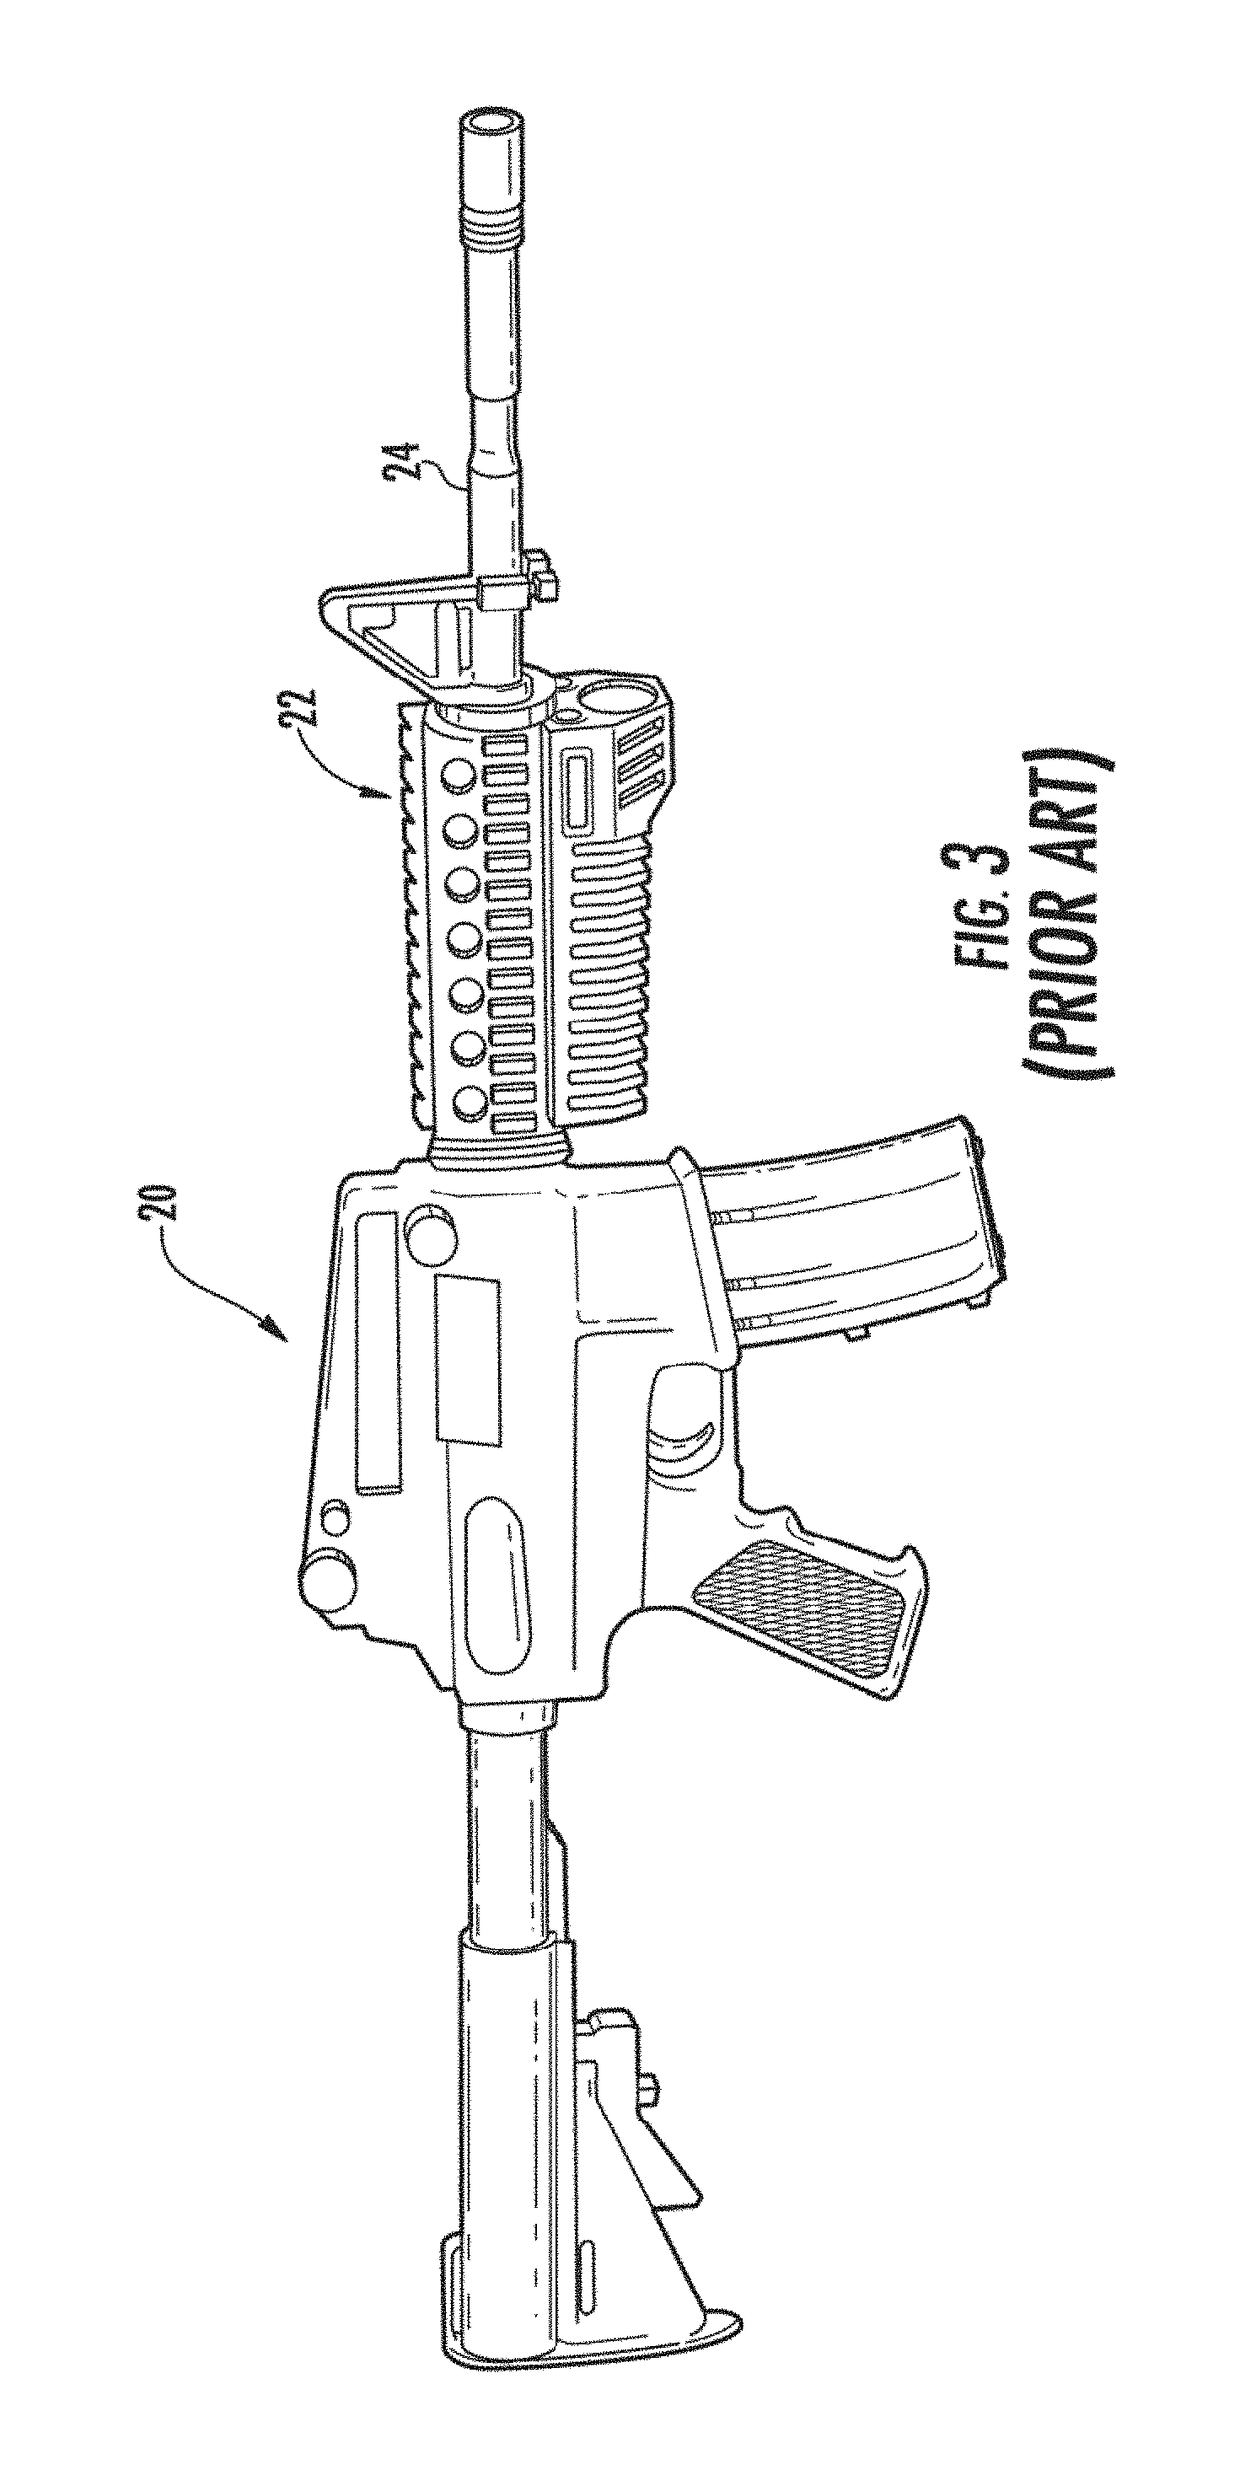 Weapon mounted light and operation thereof